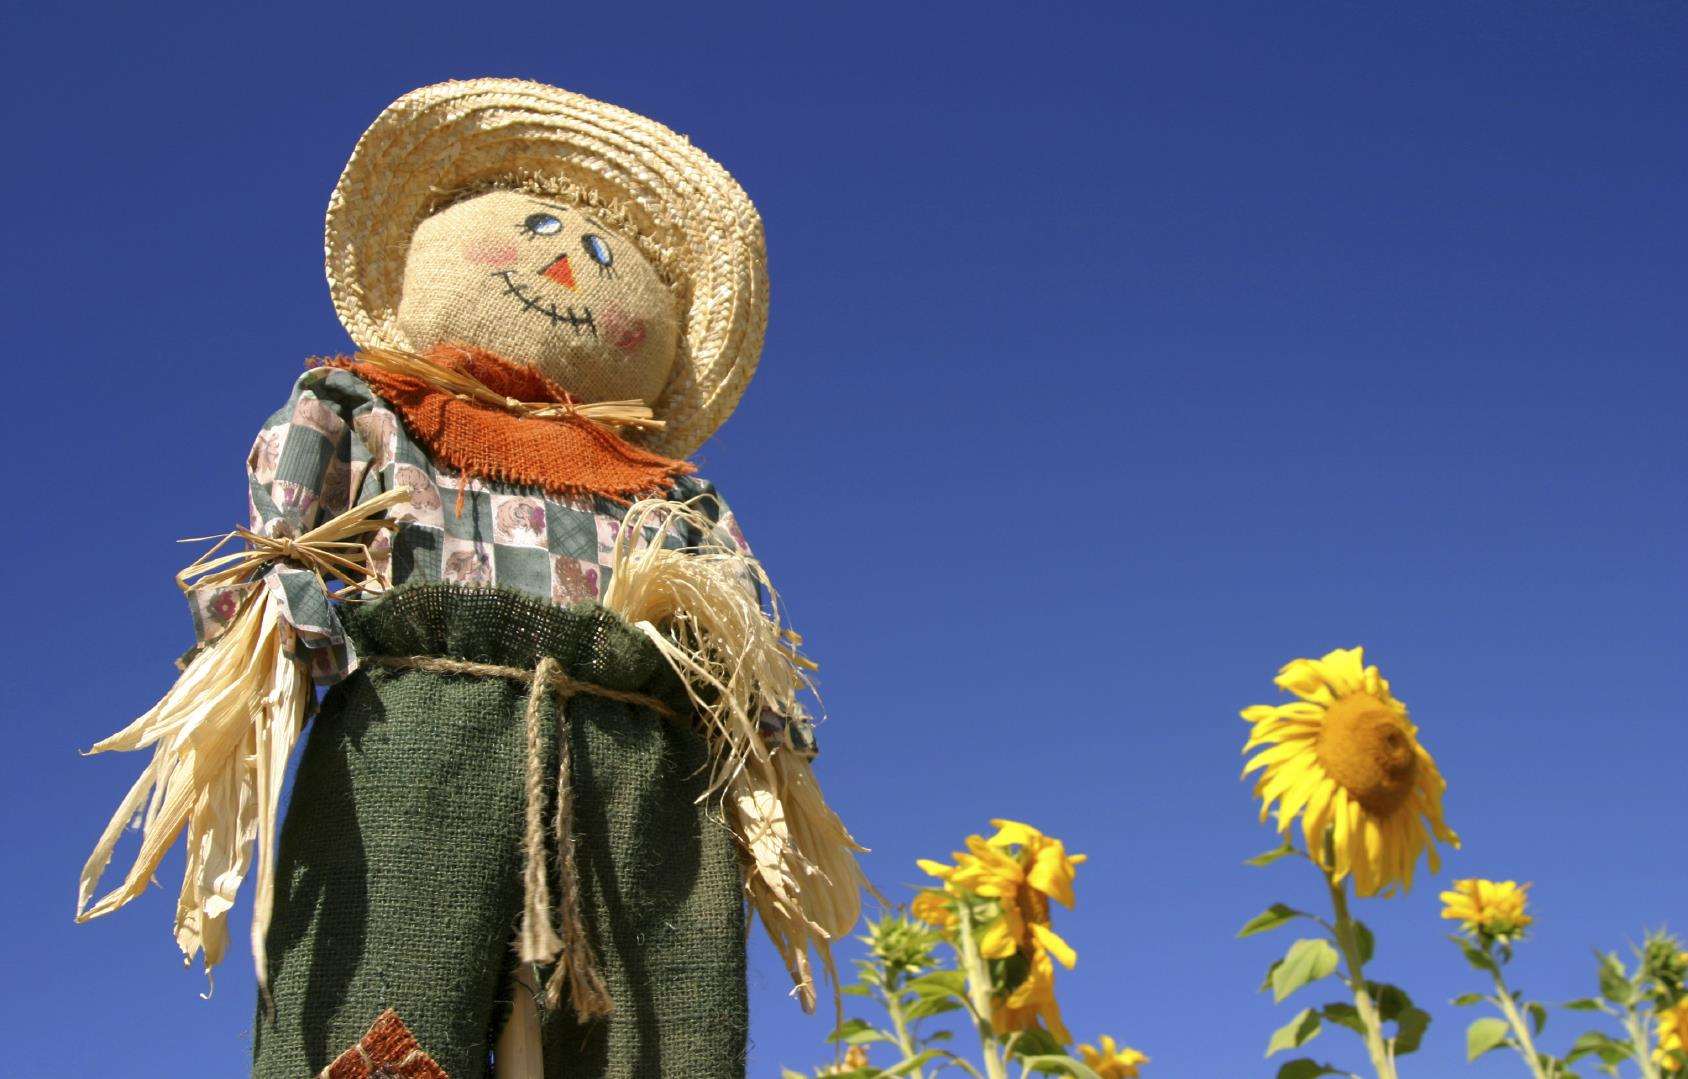 Scarecrows will be out in force